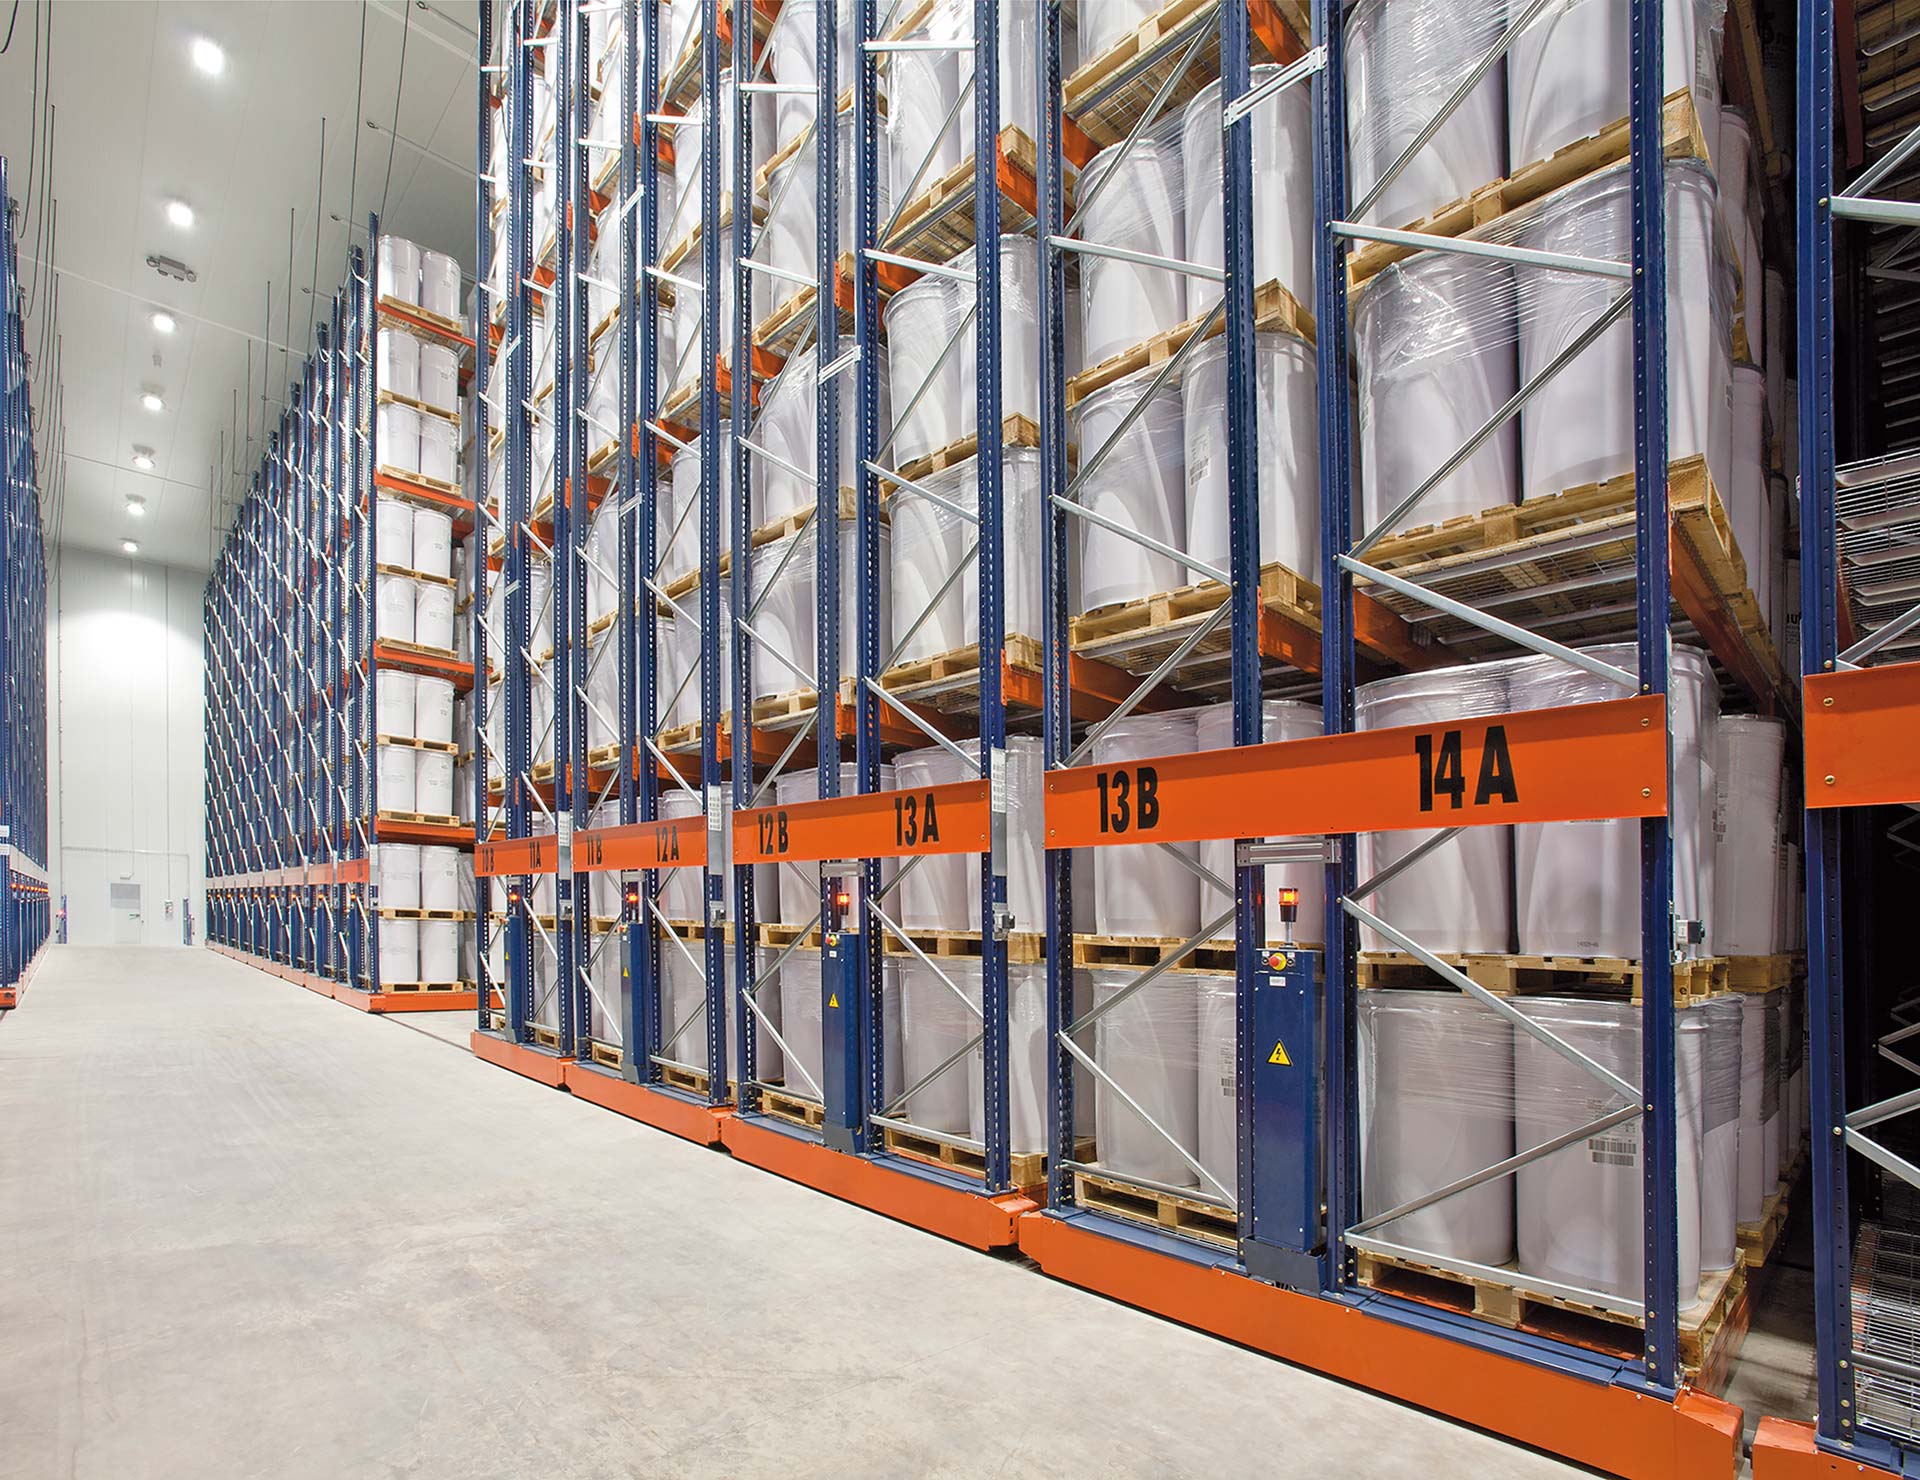 Movirack pallet racking can mean an installation’s storage capacity increases between 80% and 120%